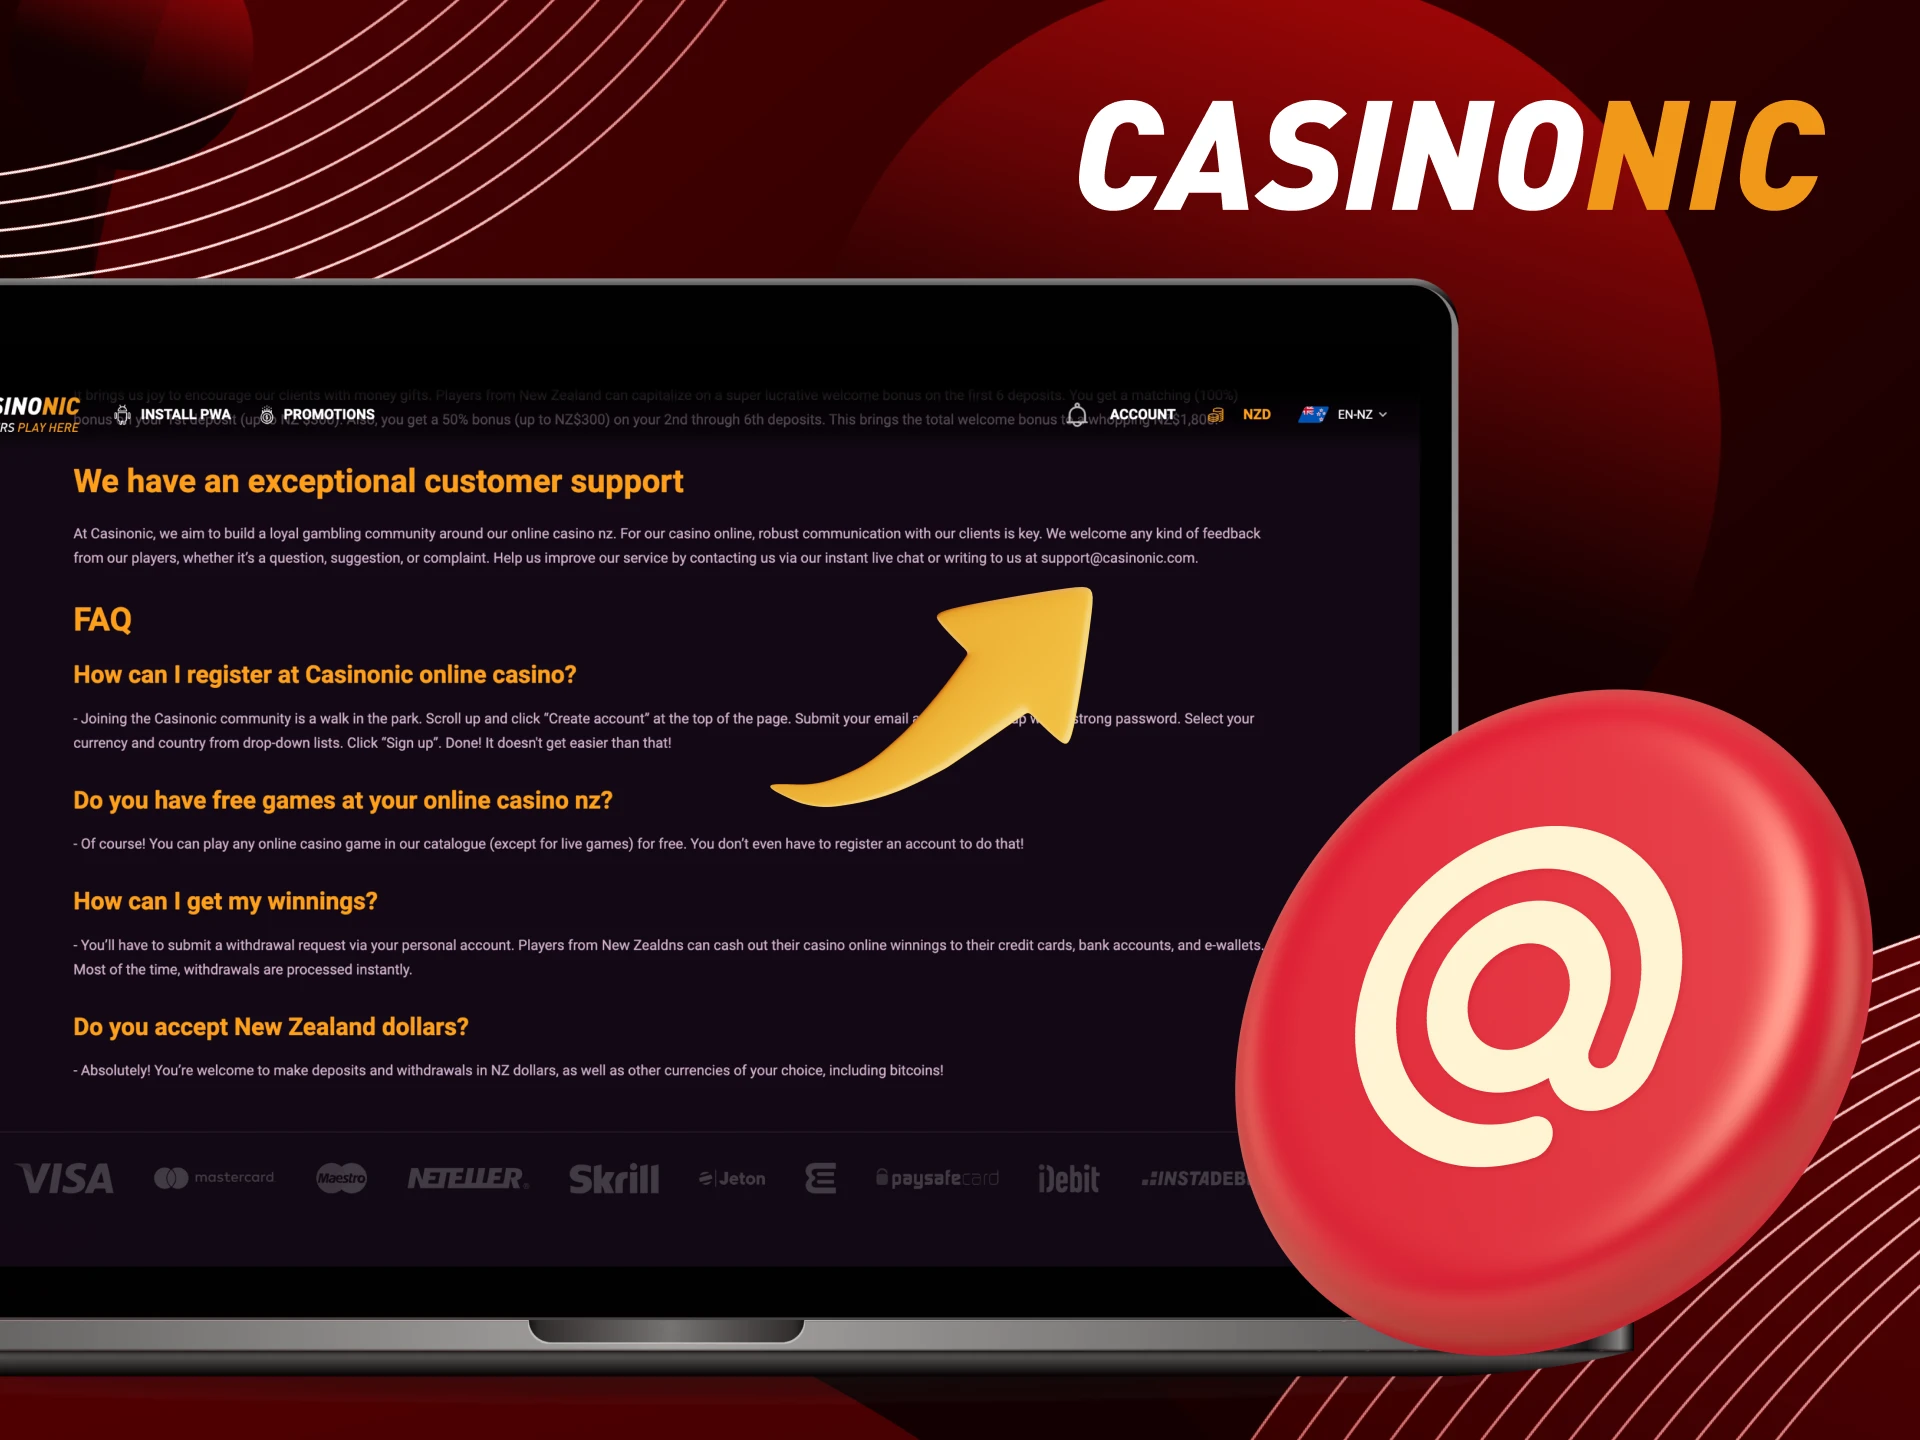 What questions can I write to the CasinoNic online casino support service by email.